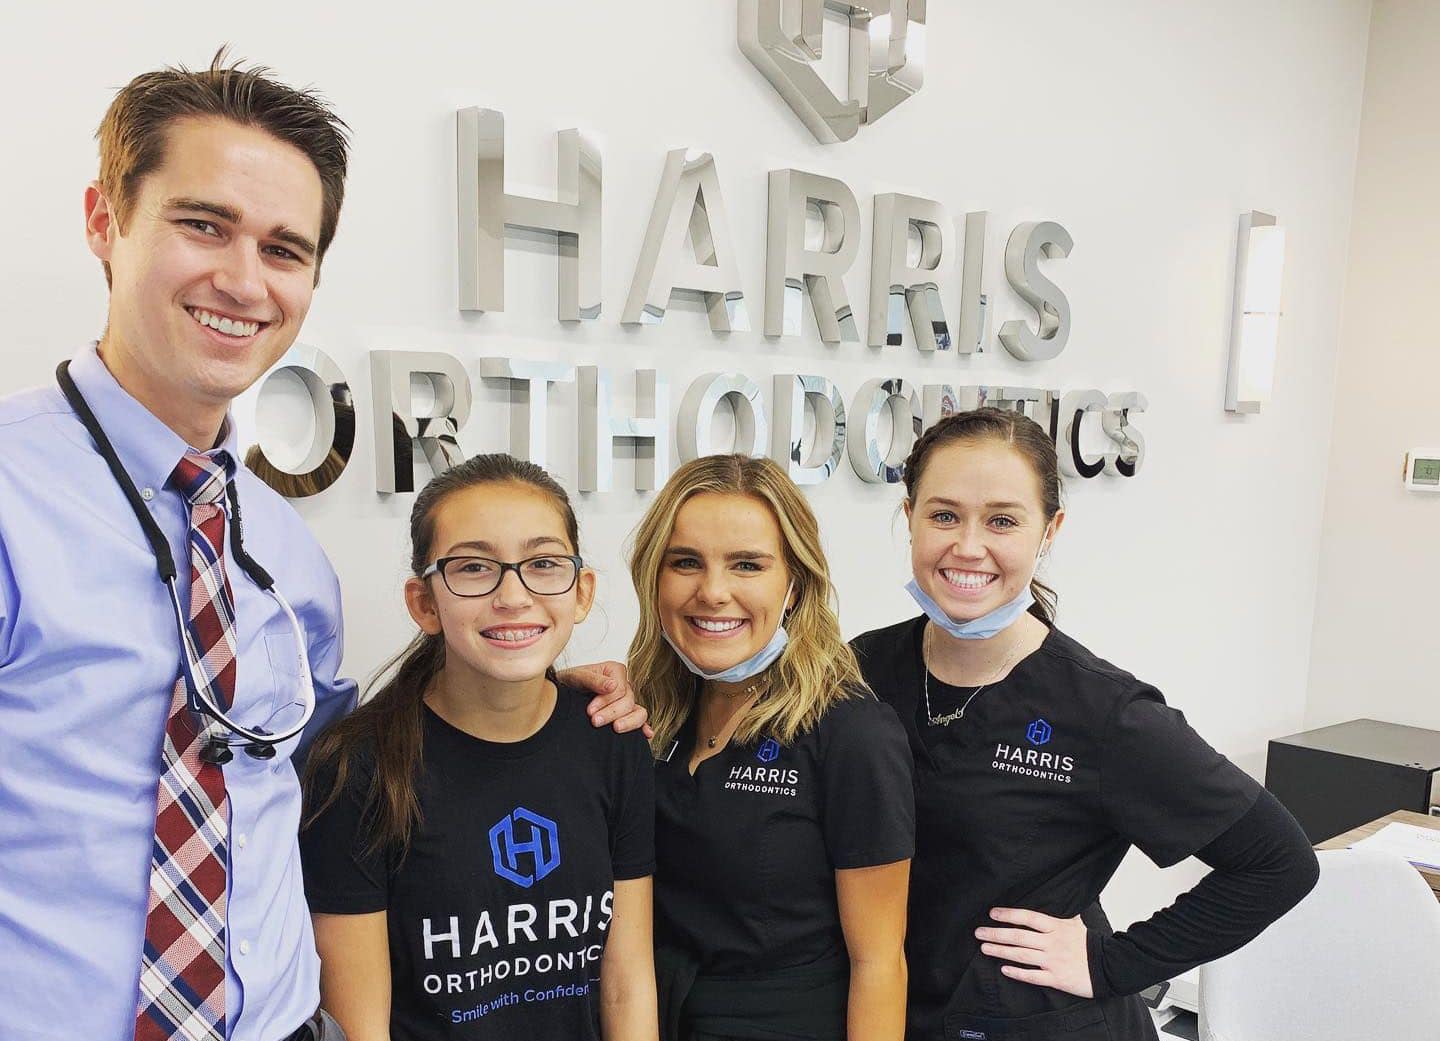 Dr. Harris and his team members